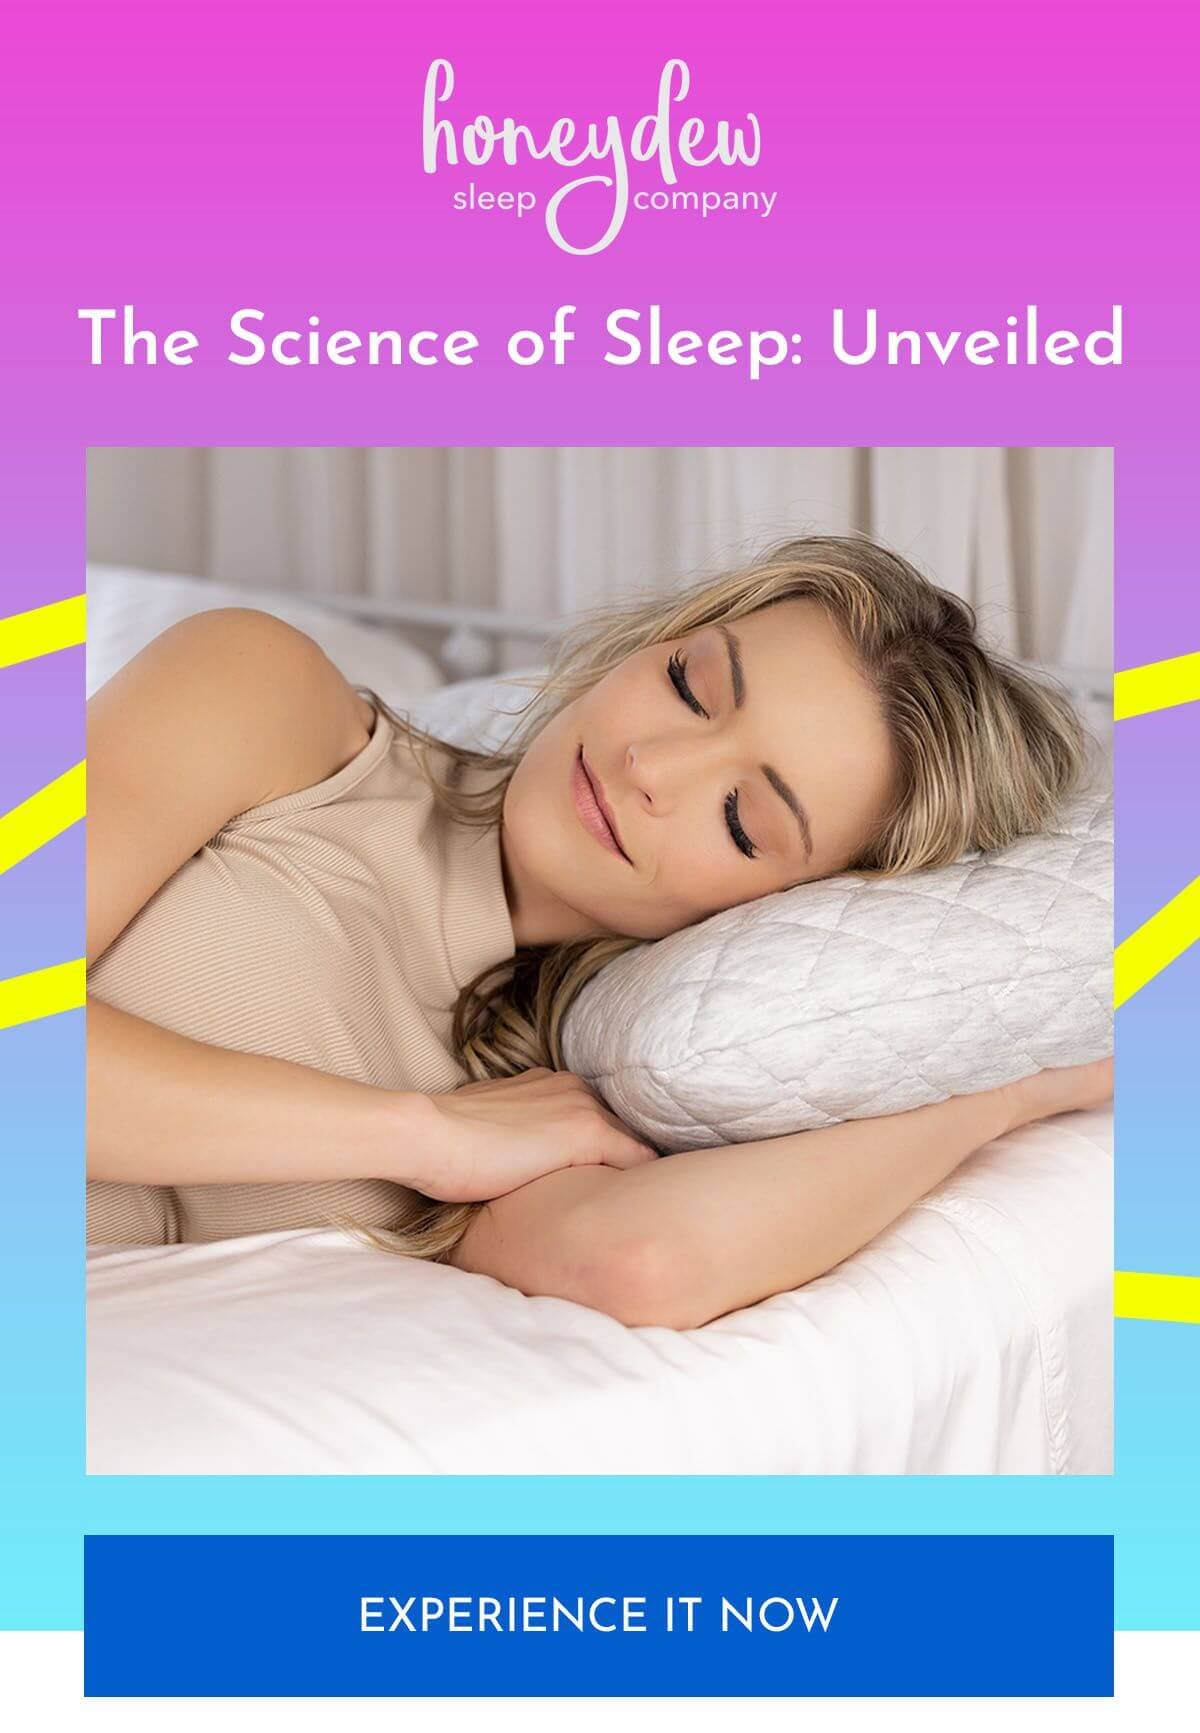 The Science of Sleep: Unveiled